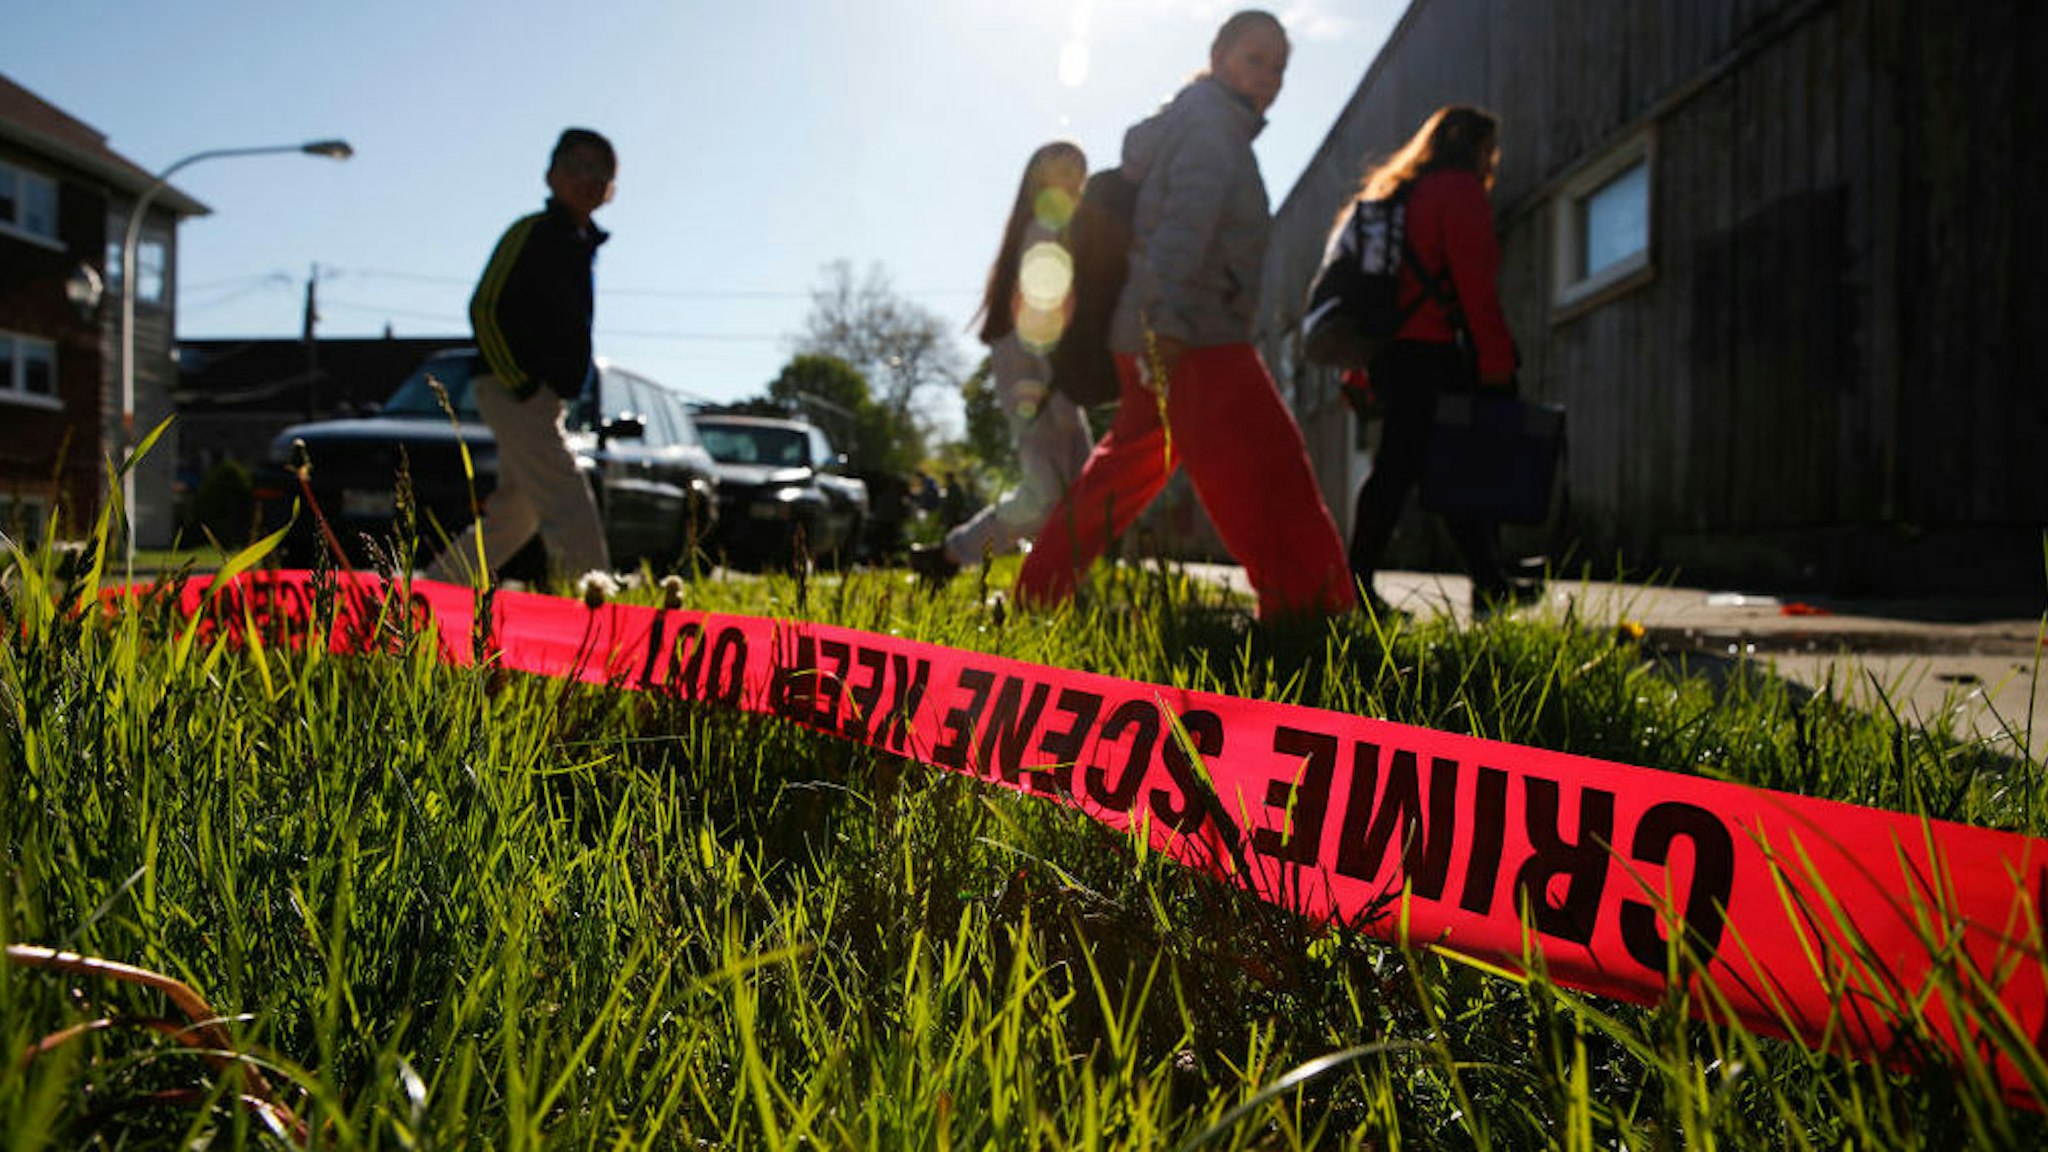 Pedestrians walk near the intersection of South Rockwell Street and West 46th Place in the Brighton Park of Chicago on Monday, May 8, 2017 where two people were killed and eight others were wounded in an attack at the site of a memorial for a man who was slain yesterday. Chicago police First Deputy Superintendent Kevin Navarro told reporters at the scene in the 2600 block of West 46th Place that the attack was "another brazen act of gang violence." (Jose M. Osorio/Chicago Tribune/TNS)